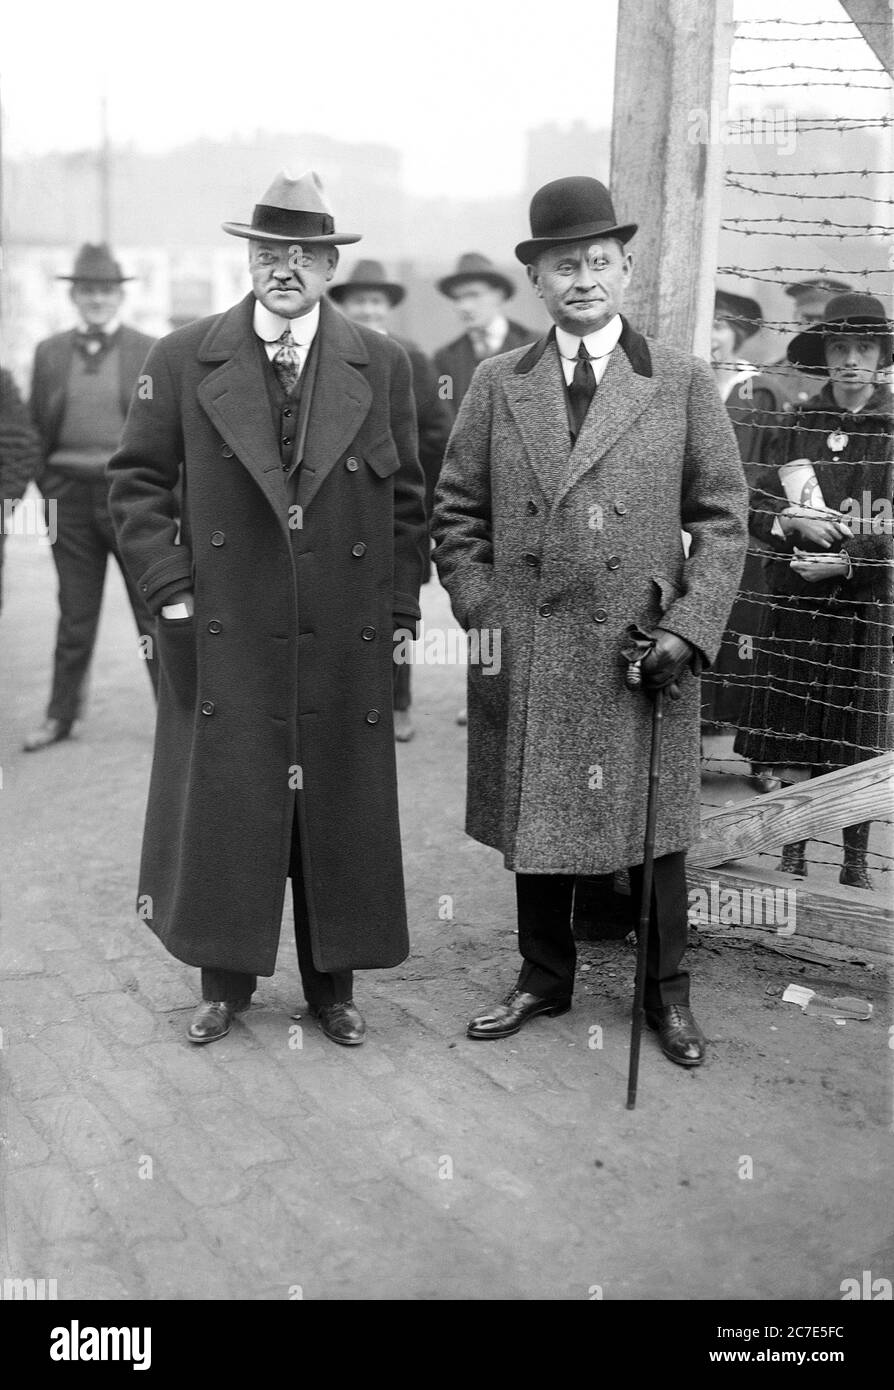 Herbert Hoover (1874-1964), Director of the U.S. Food Administration during  World War I with Businessman and Manufacturer Edward Nash Hurley  (1864-1933) on the street in New York City, New York, USA, Bain